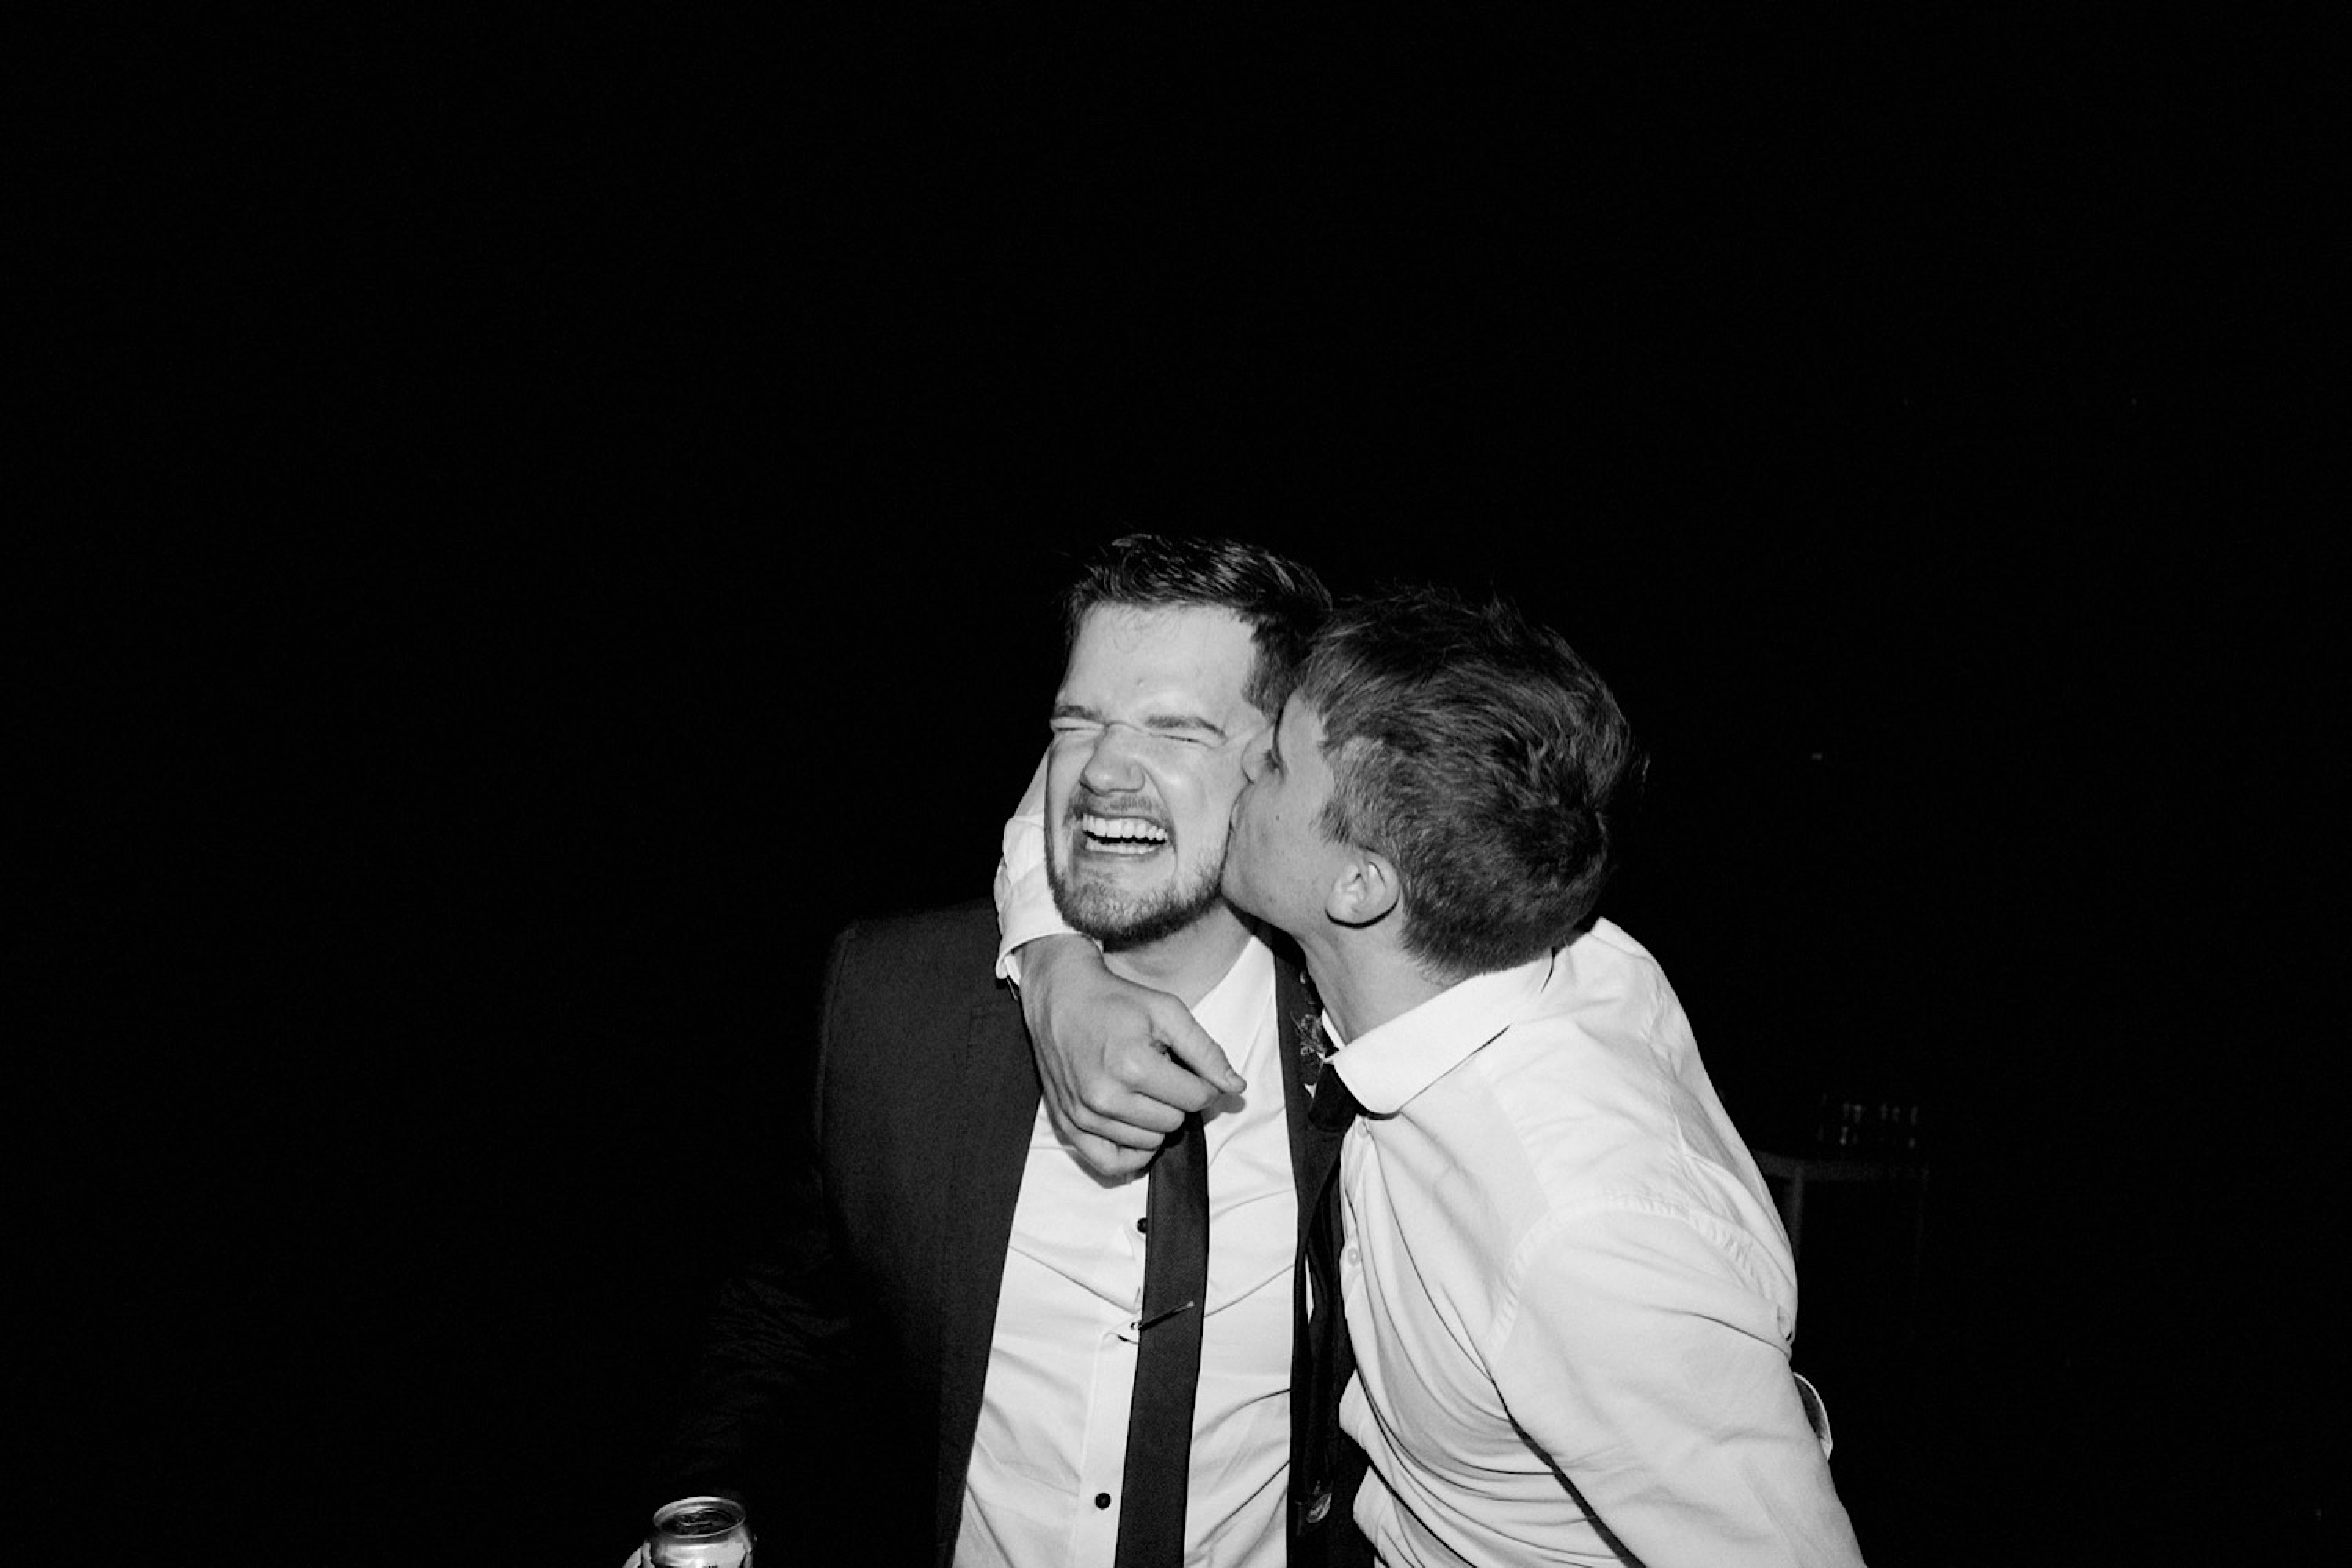 A black & white photo of the groom, who's full of joy, getting a kiss from one of his mates.